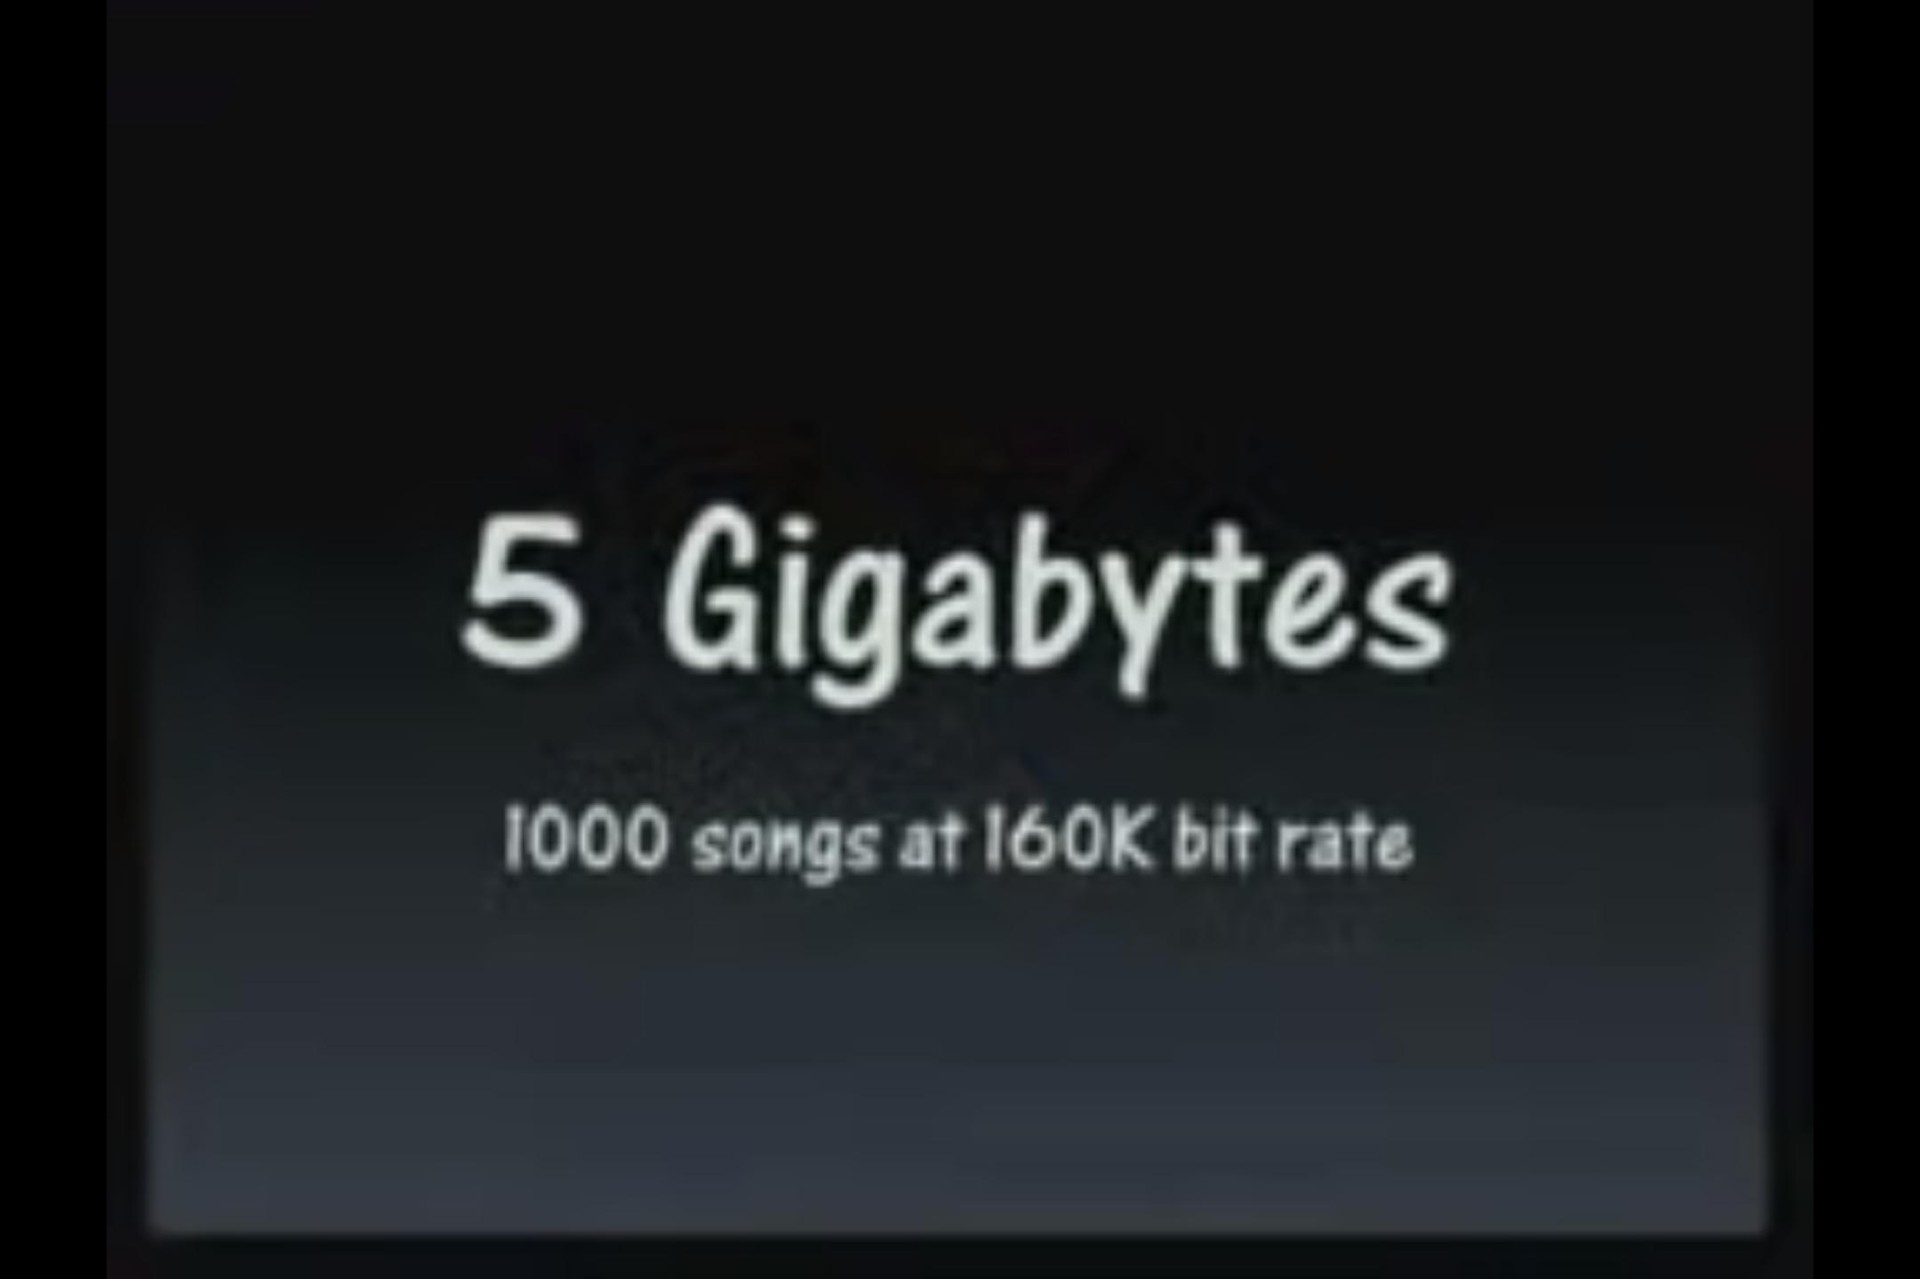 cue songs at bit rate | Apple